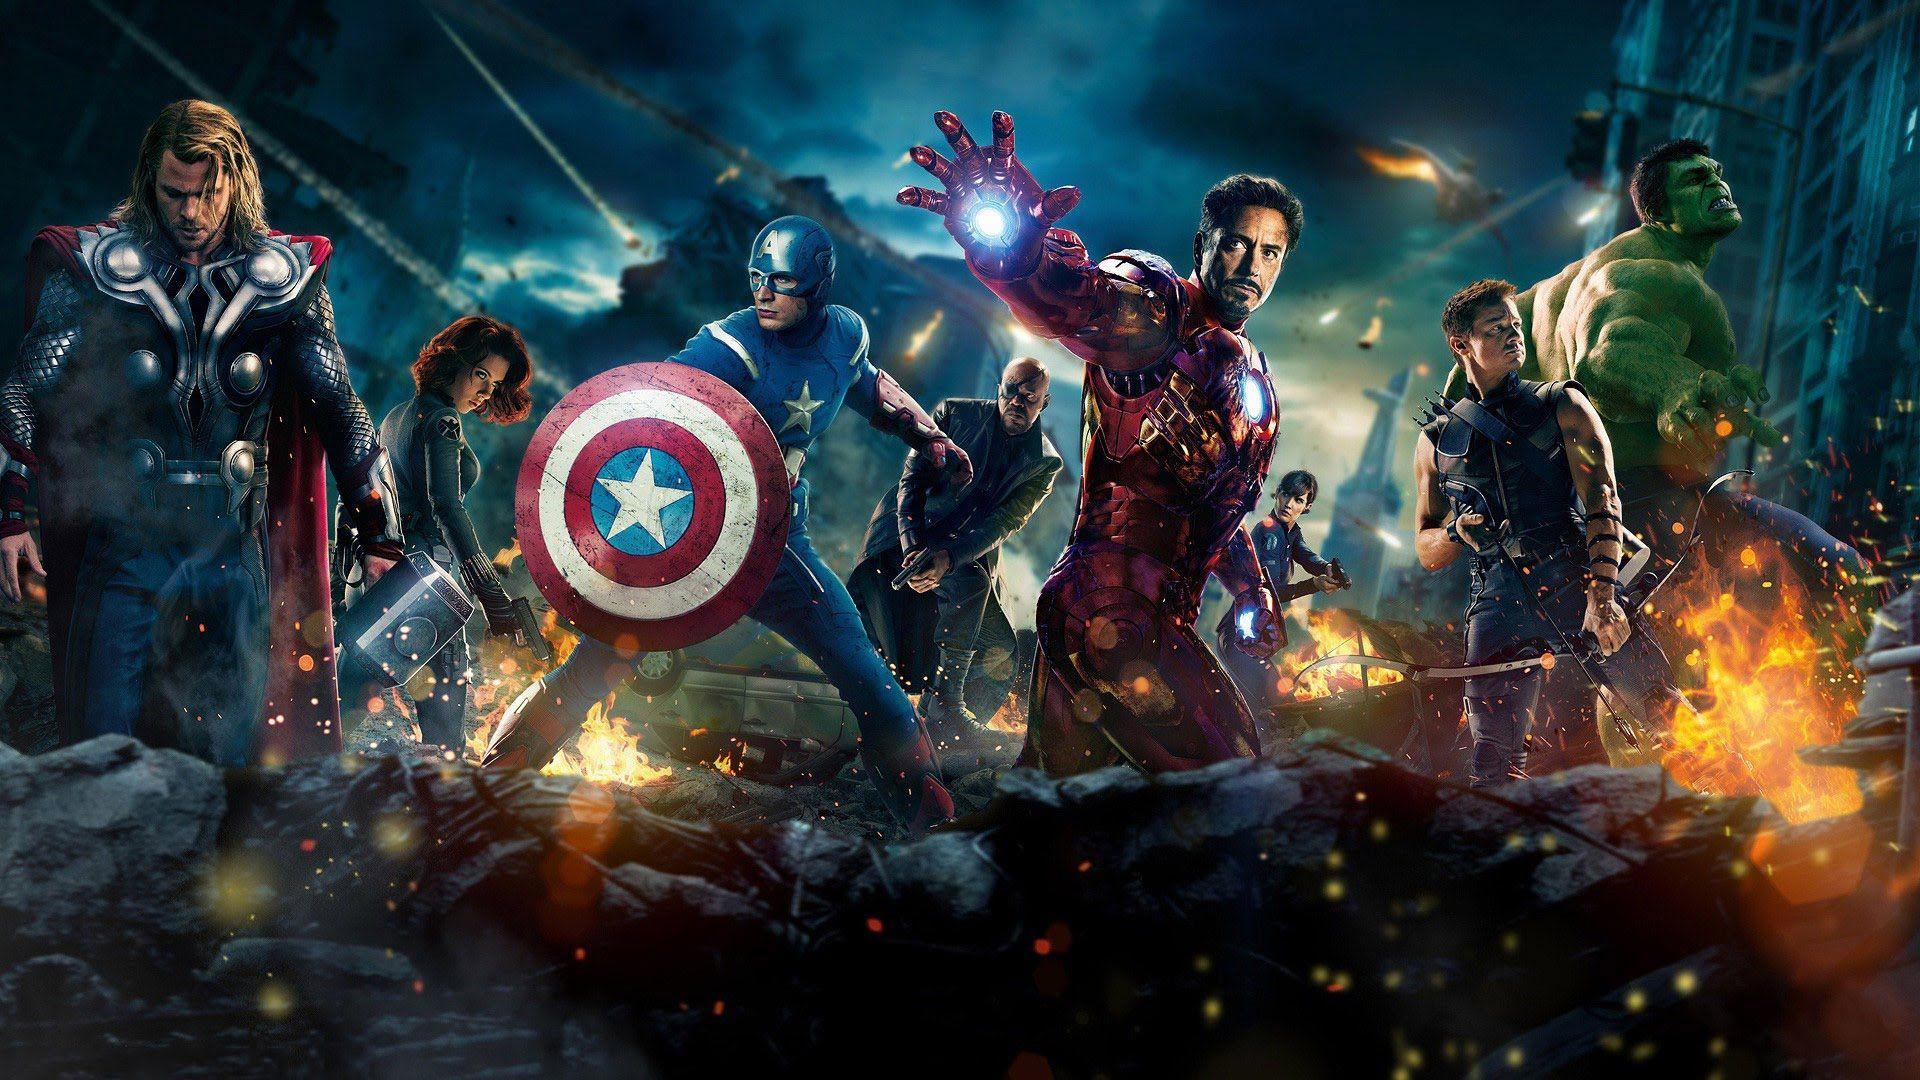 Avengers: Age of Ultron Chrome Theme and Wallpaper